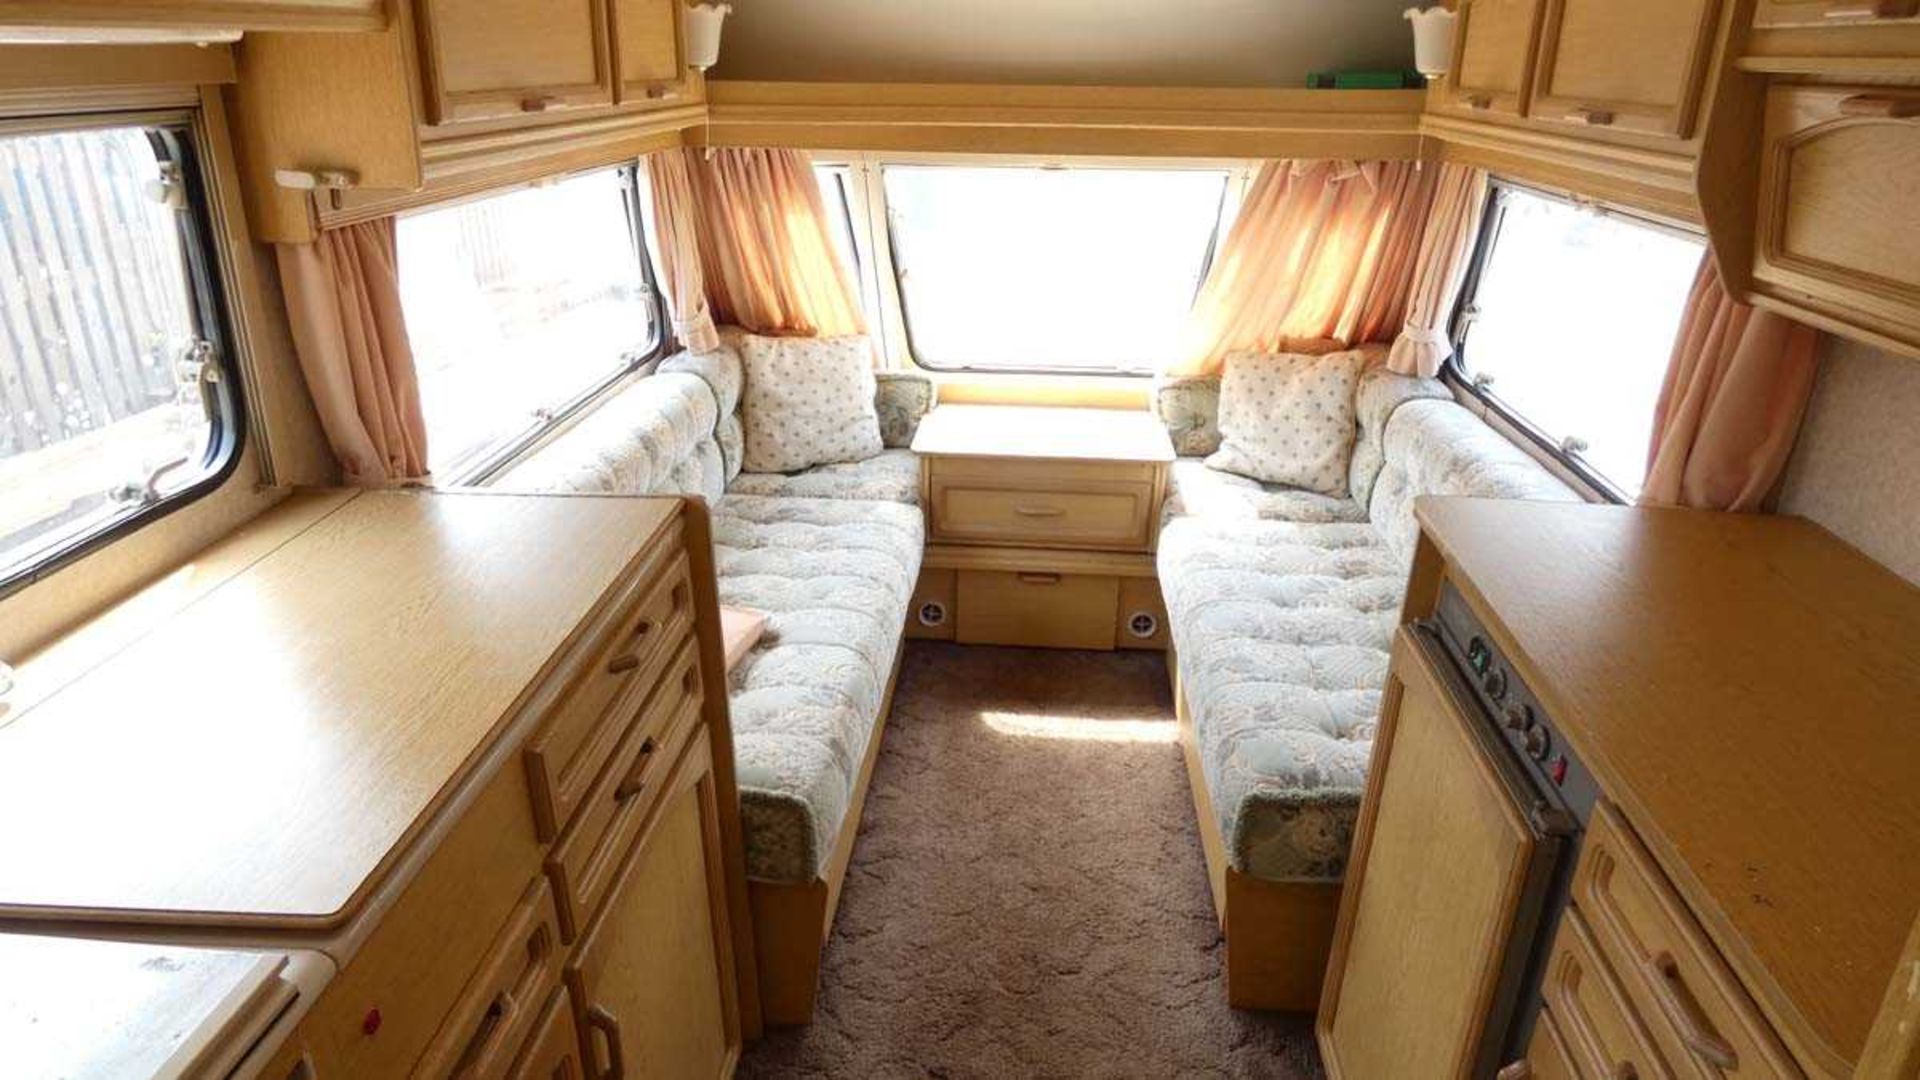 Abbey GTS215 2-berth caravan with locks and various other accessories - Image 3 of 7